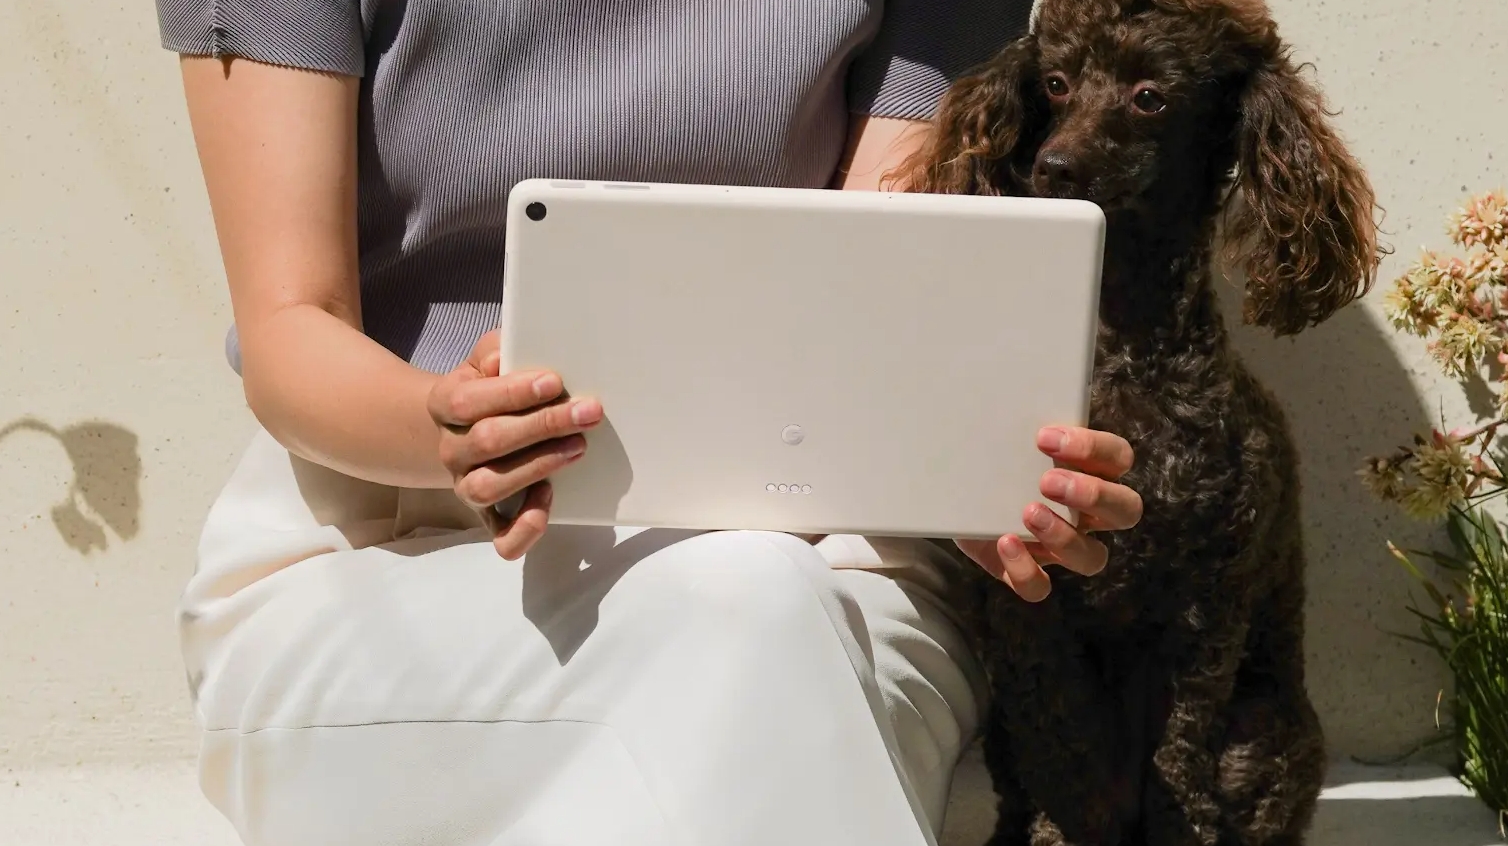 Image of the Pixel tablet from the back, in someone's hand